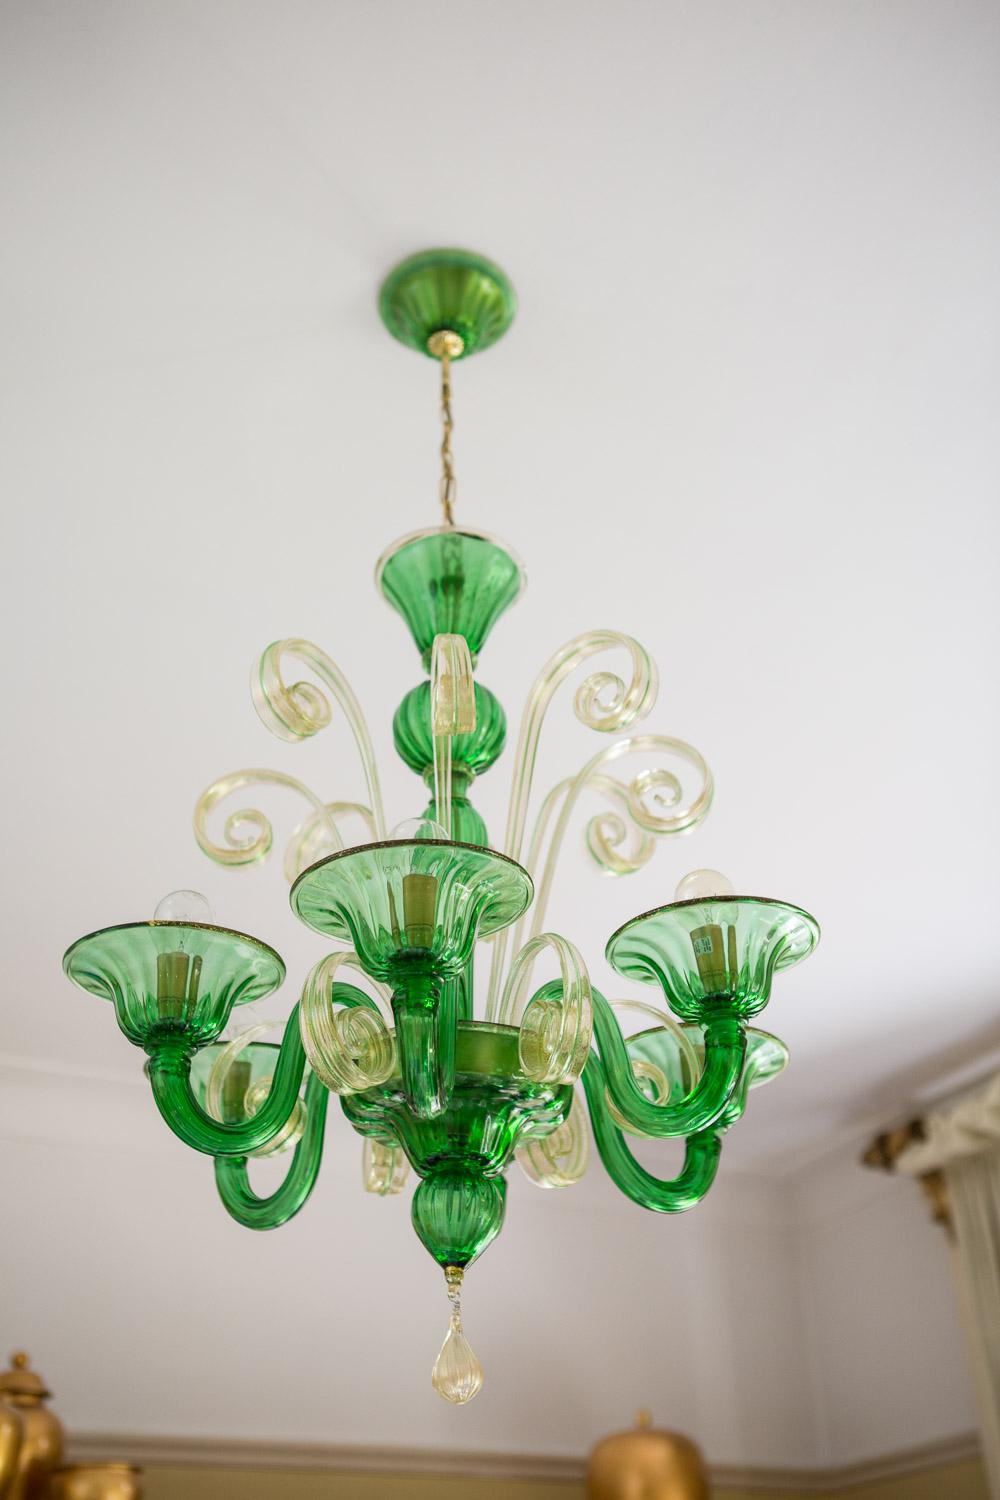 The stunning classic Murano Glass chandelier made by the renowned furnace Mazzuccto Murano in the centuries old technique of mouth blown glass on the island of Murano in Venice

Made of Green (Verde) and Clear (Cristallo) Glass with 24Ct Gold Leaf